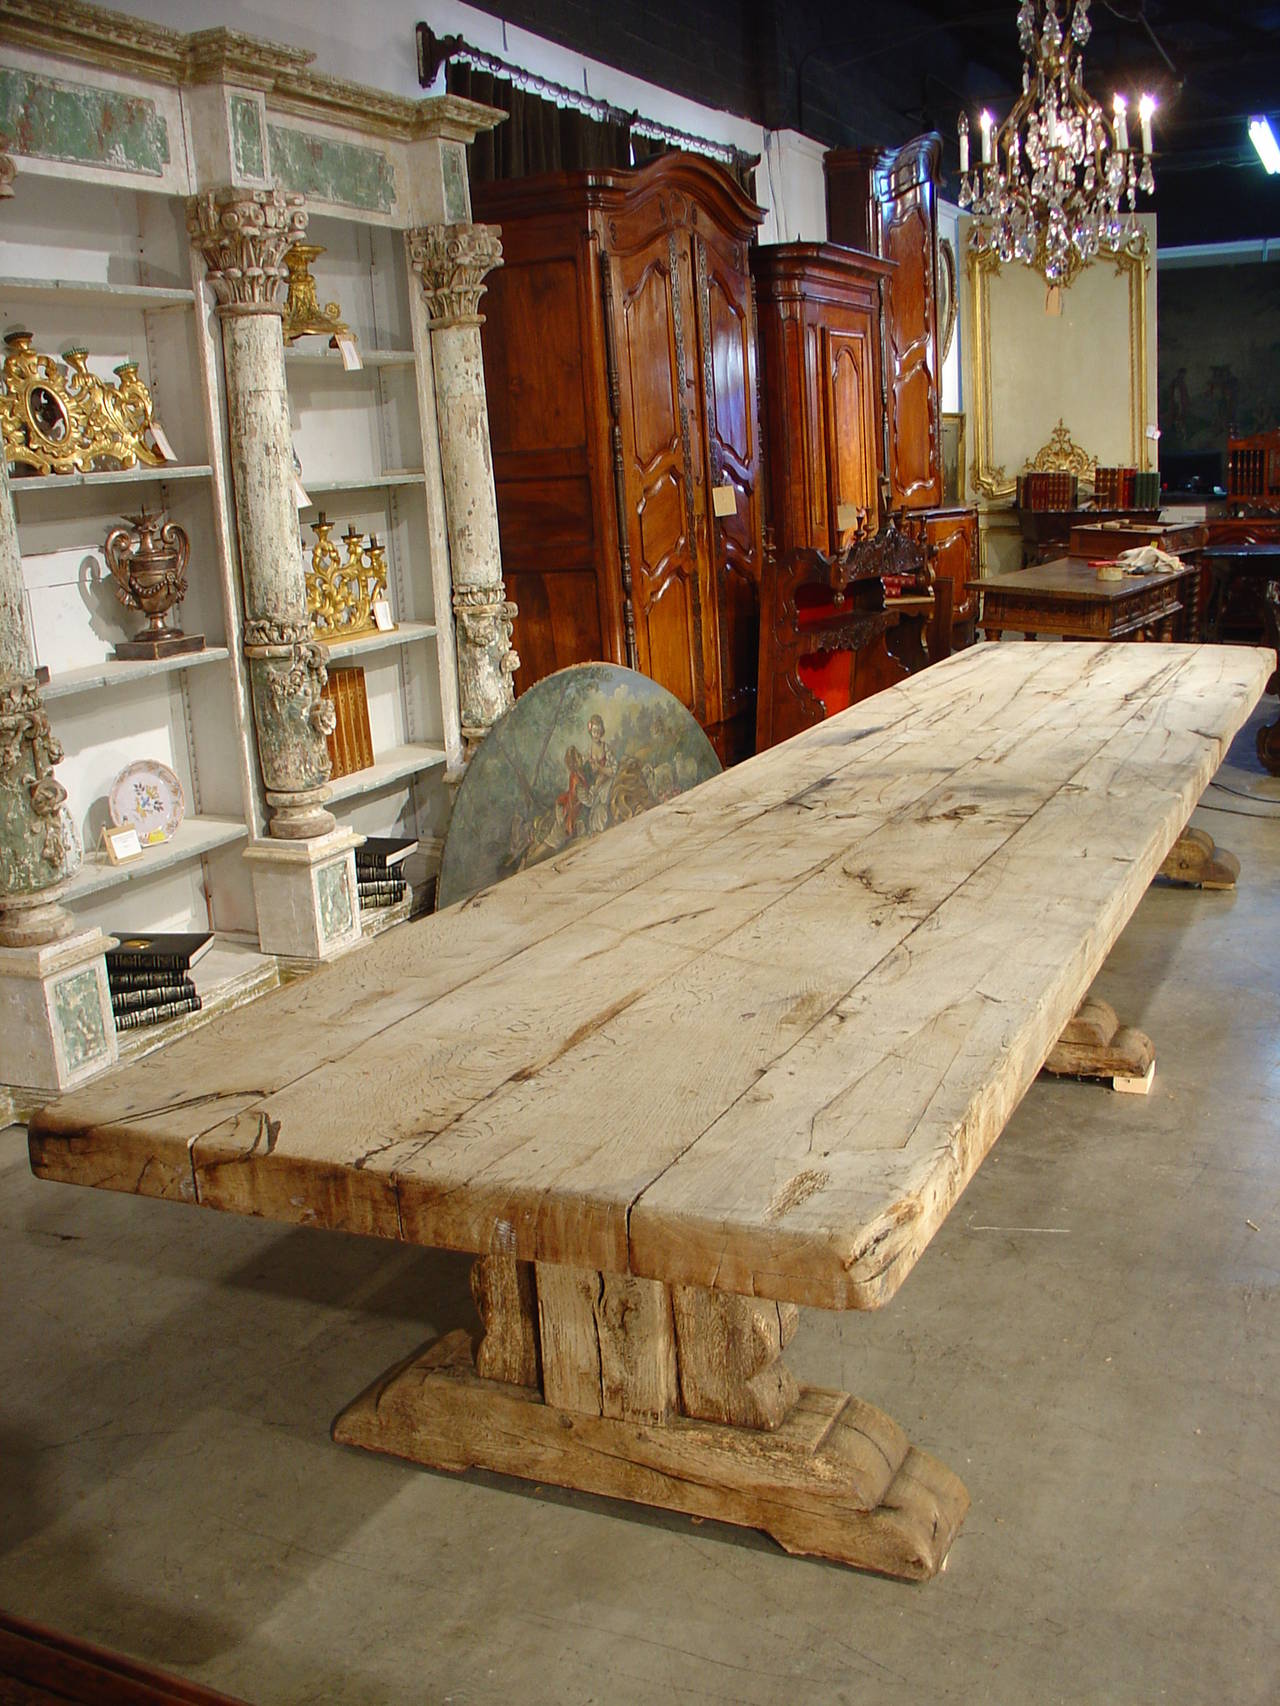 This monumental antique table is made of stripped French oak, and is the largest table we have ever found. It has beautiful thick proportions, and the top boards run the entire length of the table at over 16 feet long. It could easily seat 20